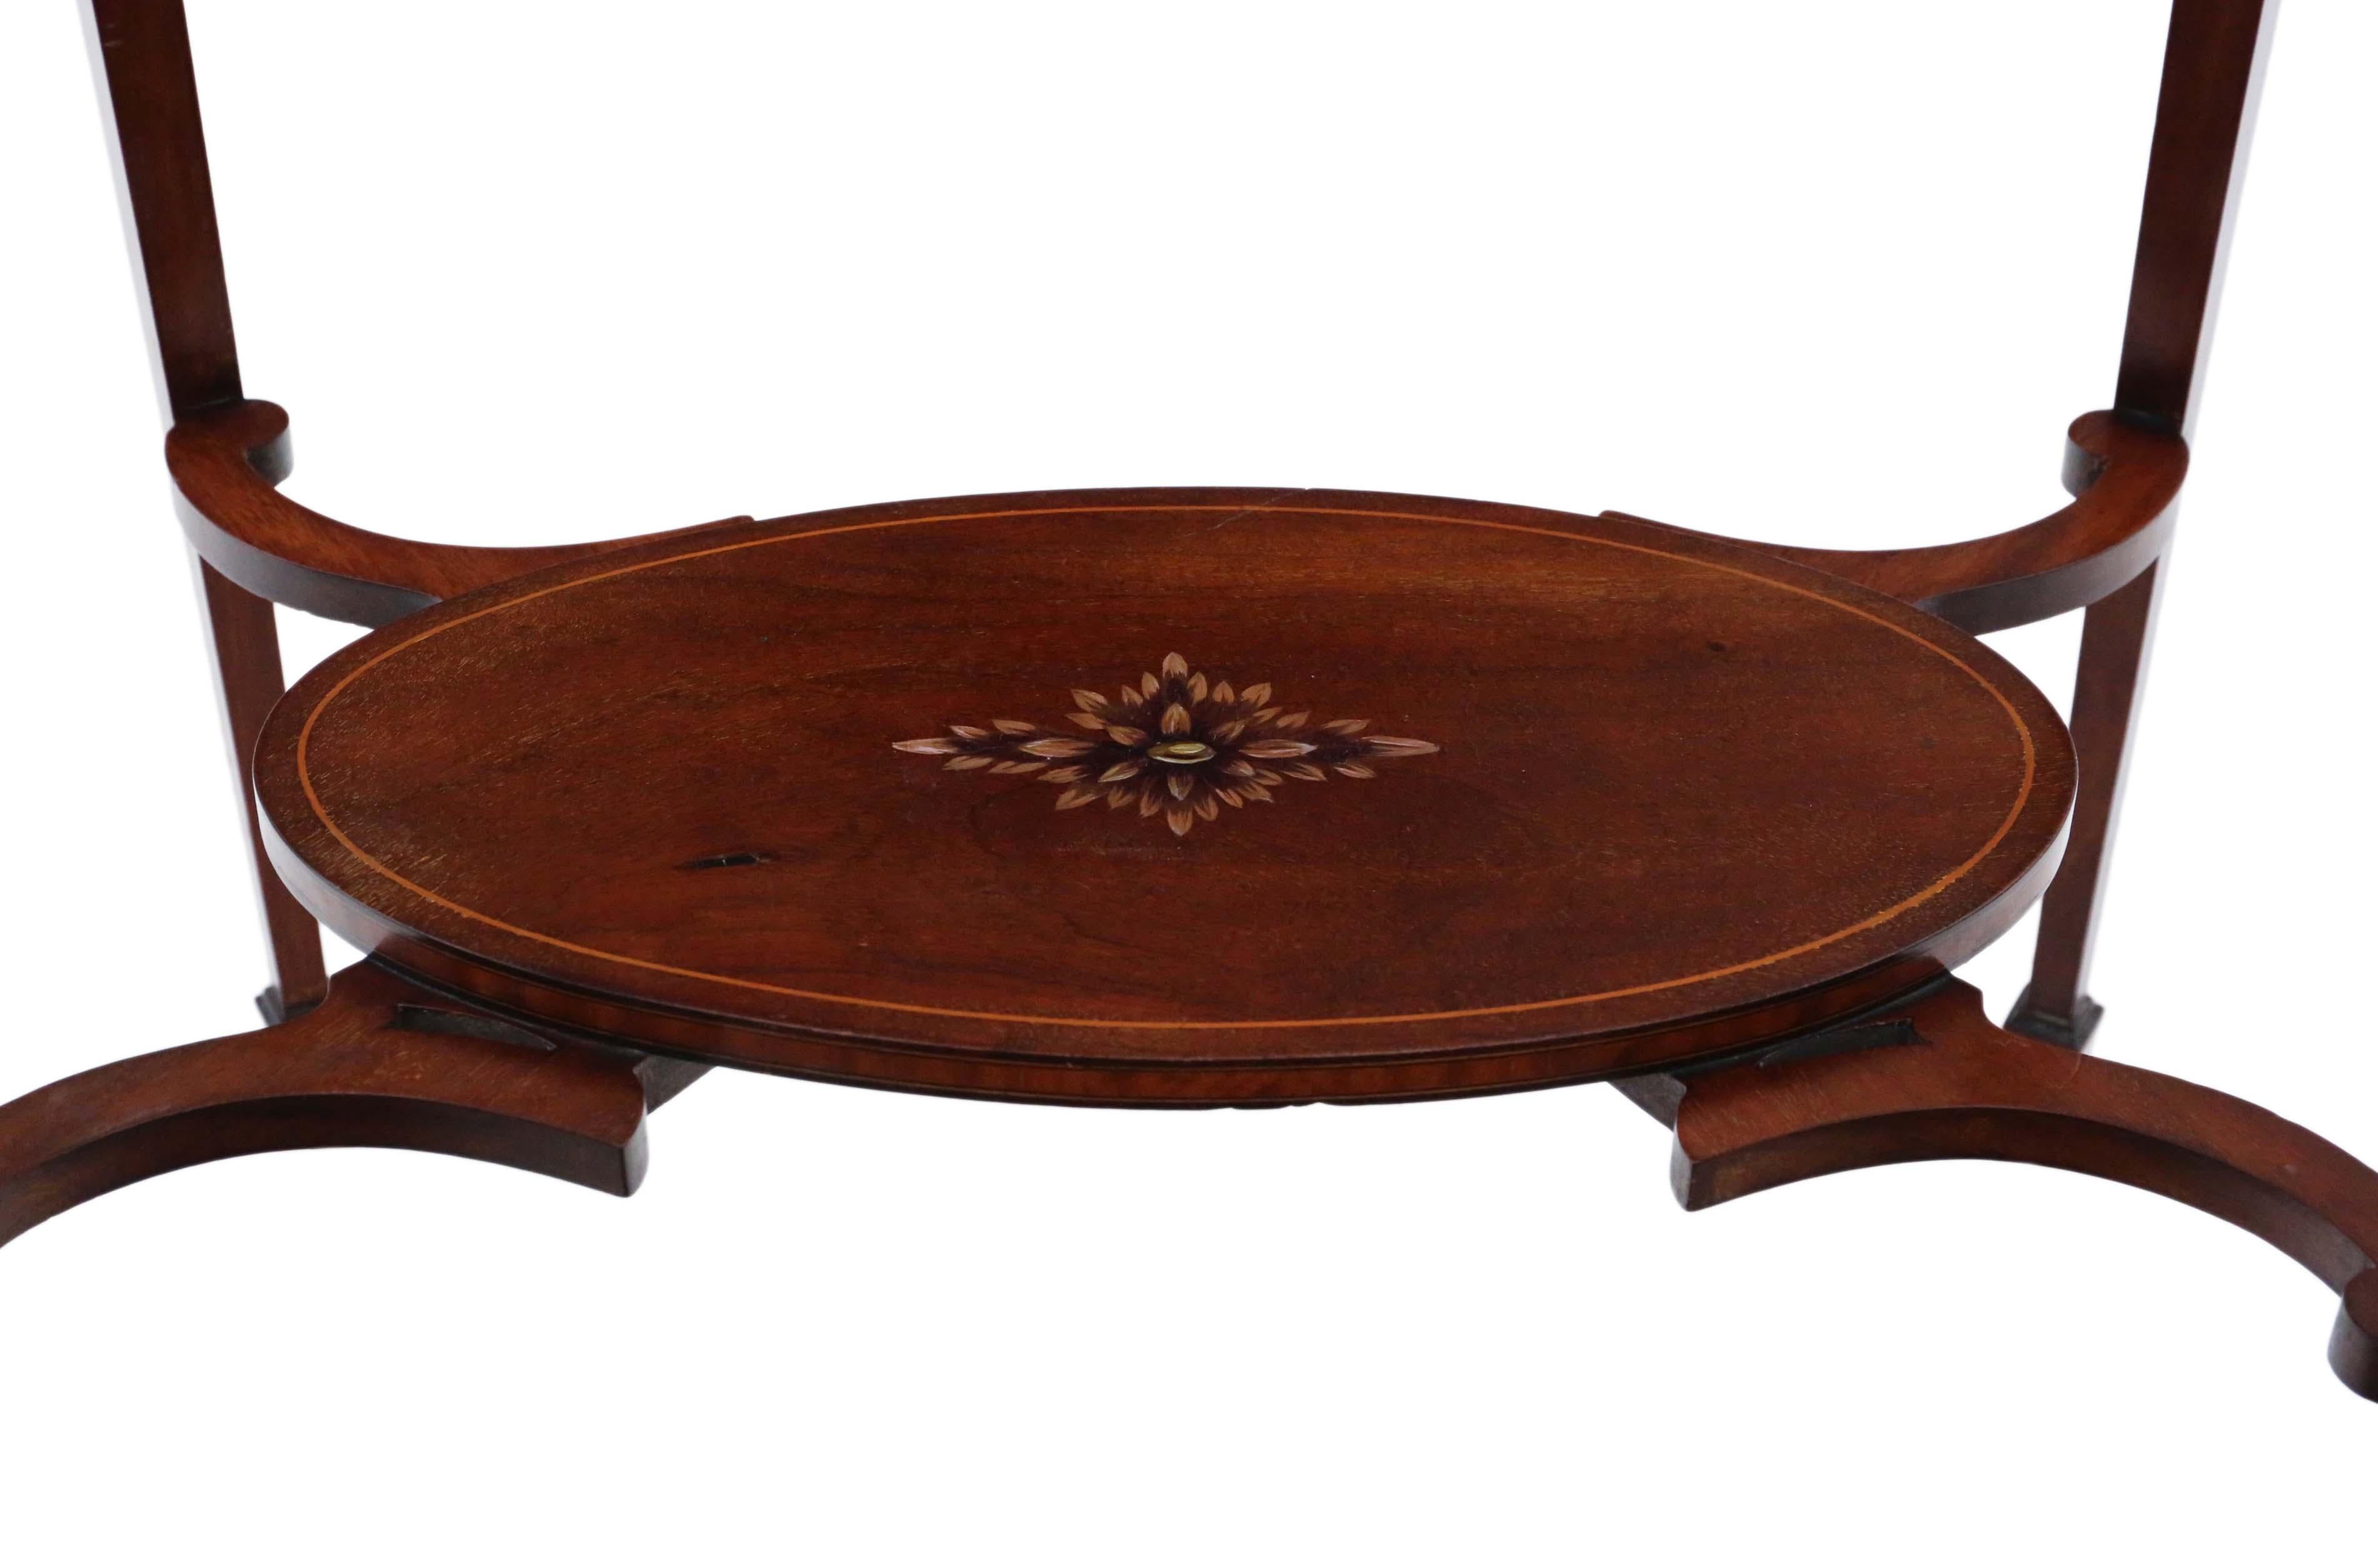 Antique fine quality 19th century decorated satinwood and mahogany occasional, side, centre or window table, circa 1895.

No loose joints and no woodworm. An abundance of character and charm. A rare decorative find.

Would look great in the